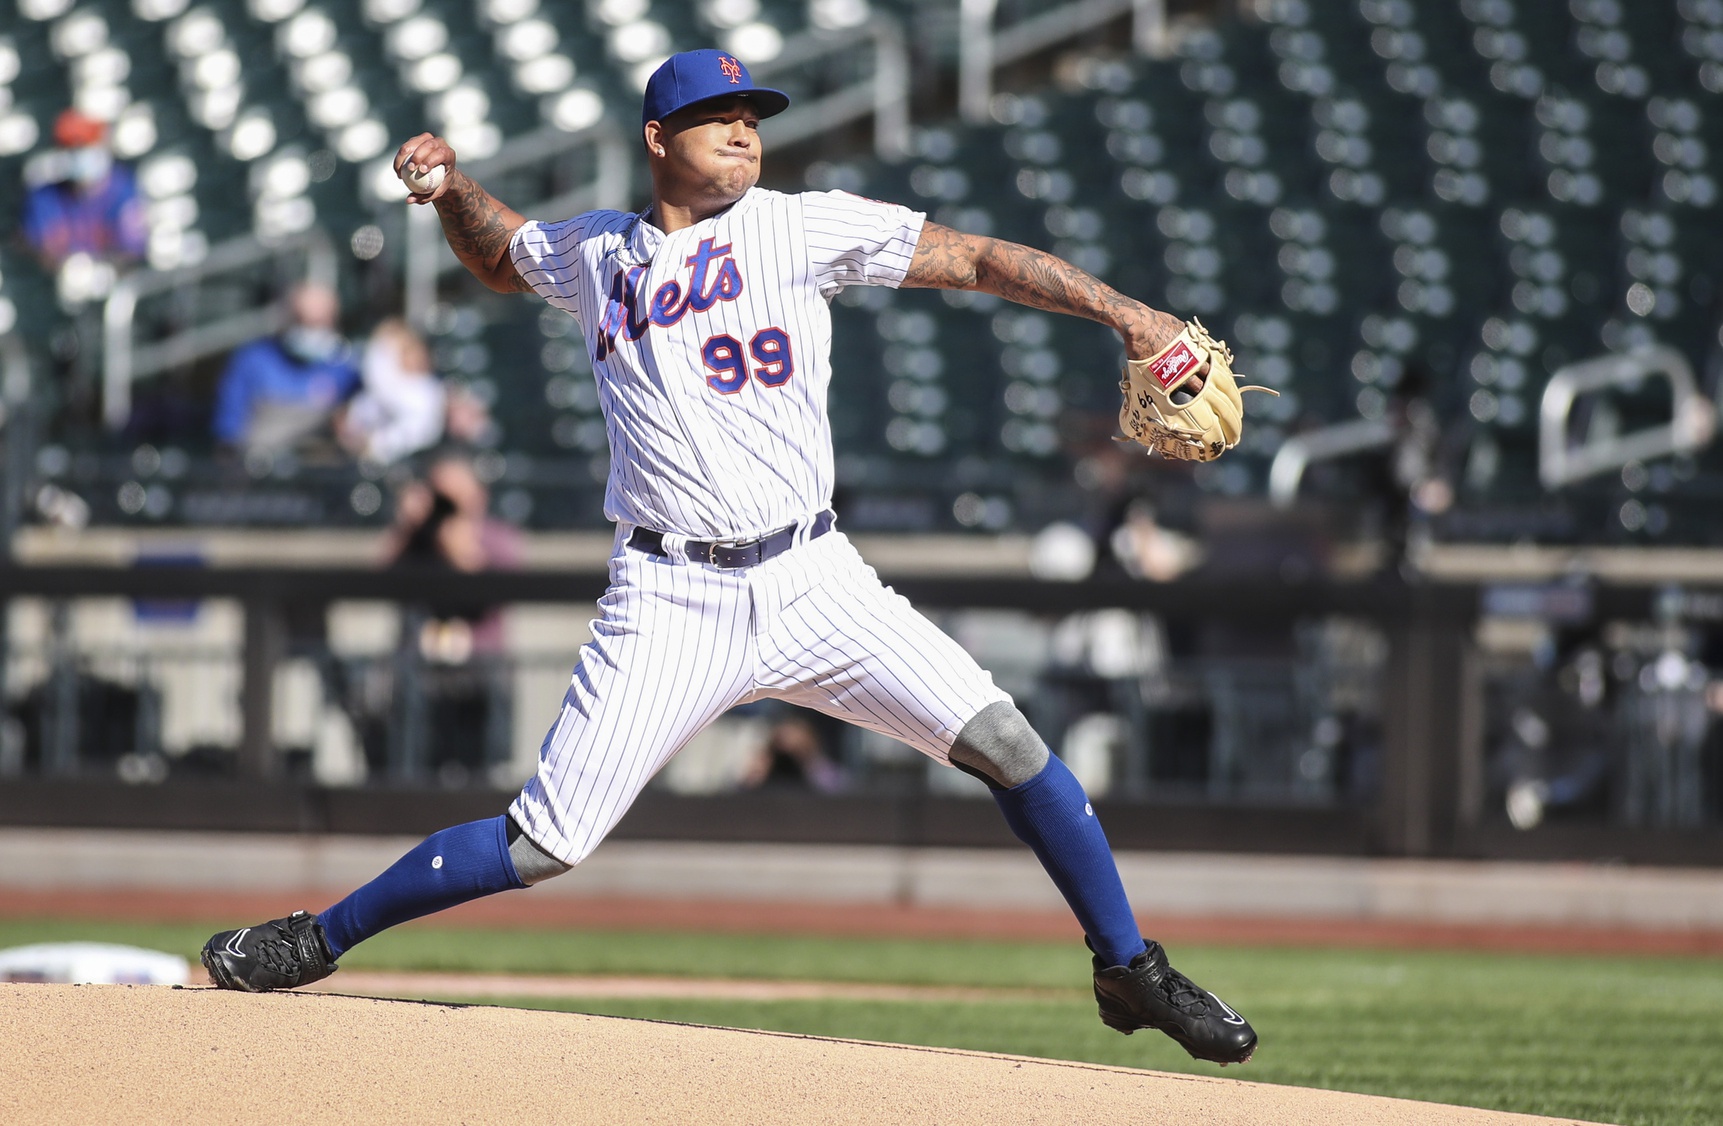 Taijuan Walker Strikes Out Eight Phillies in Solid Second Start